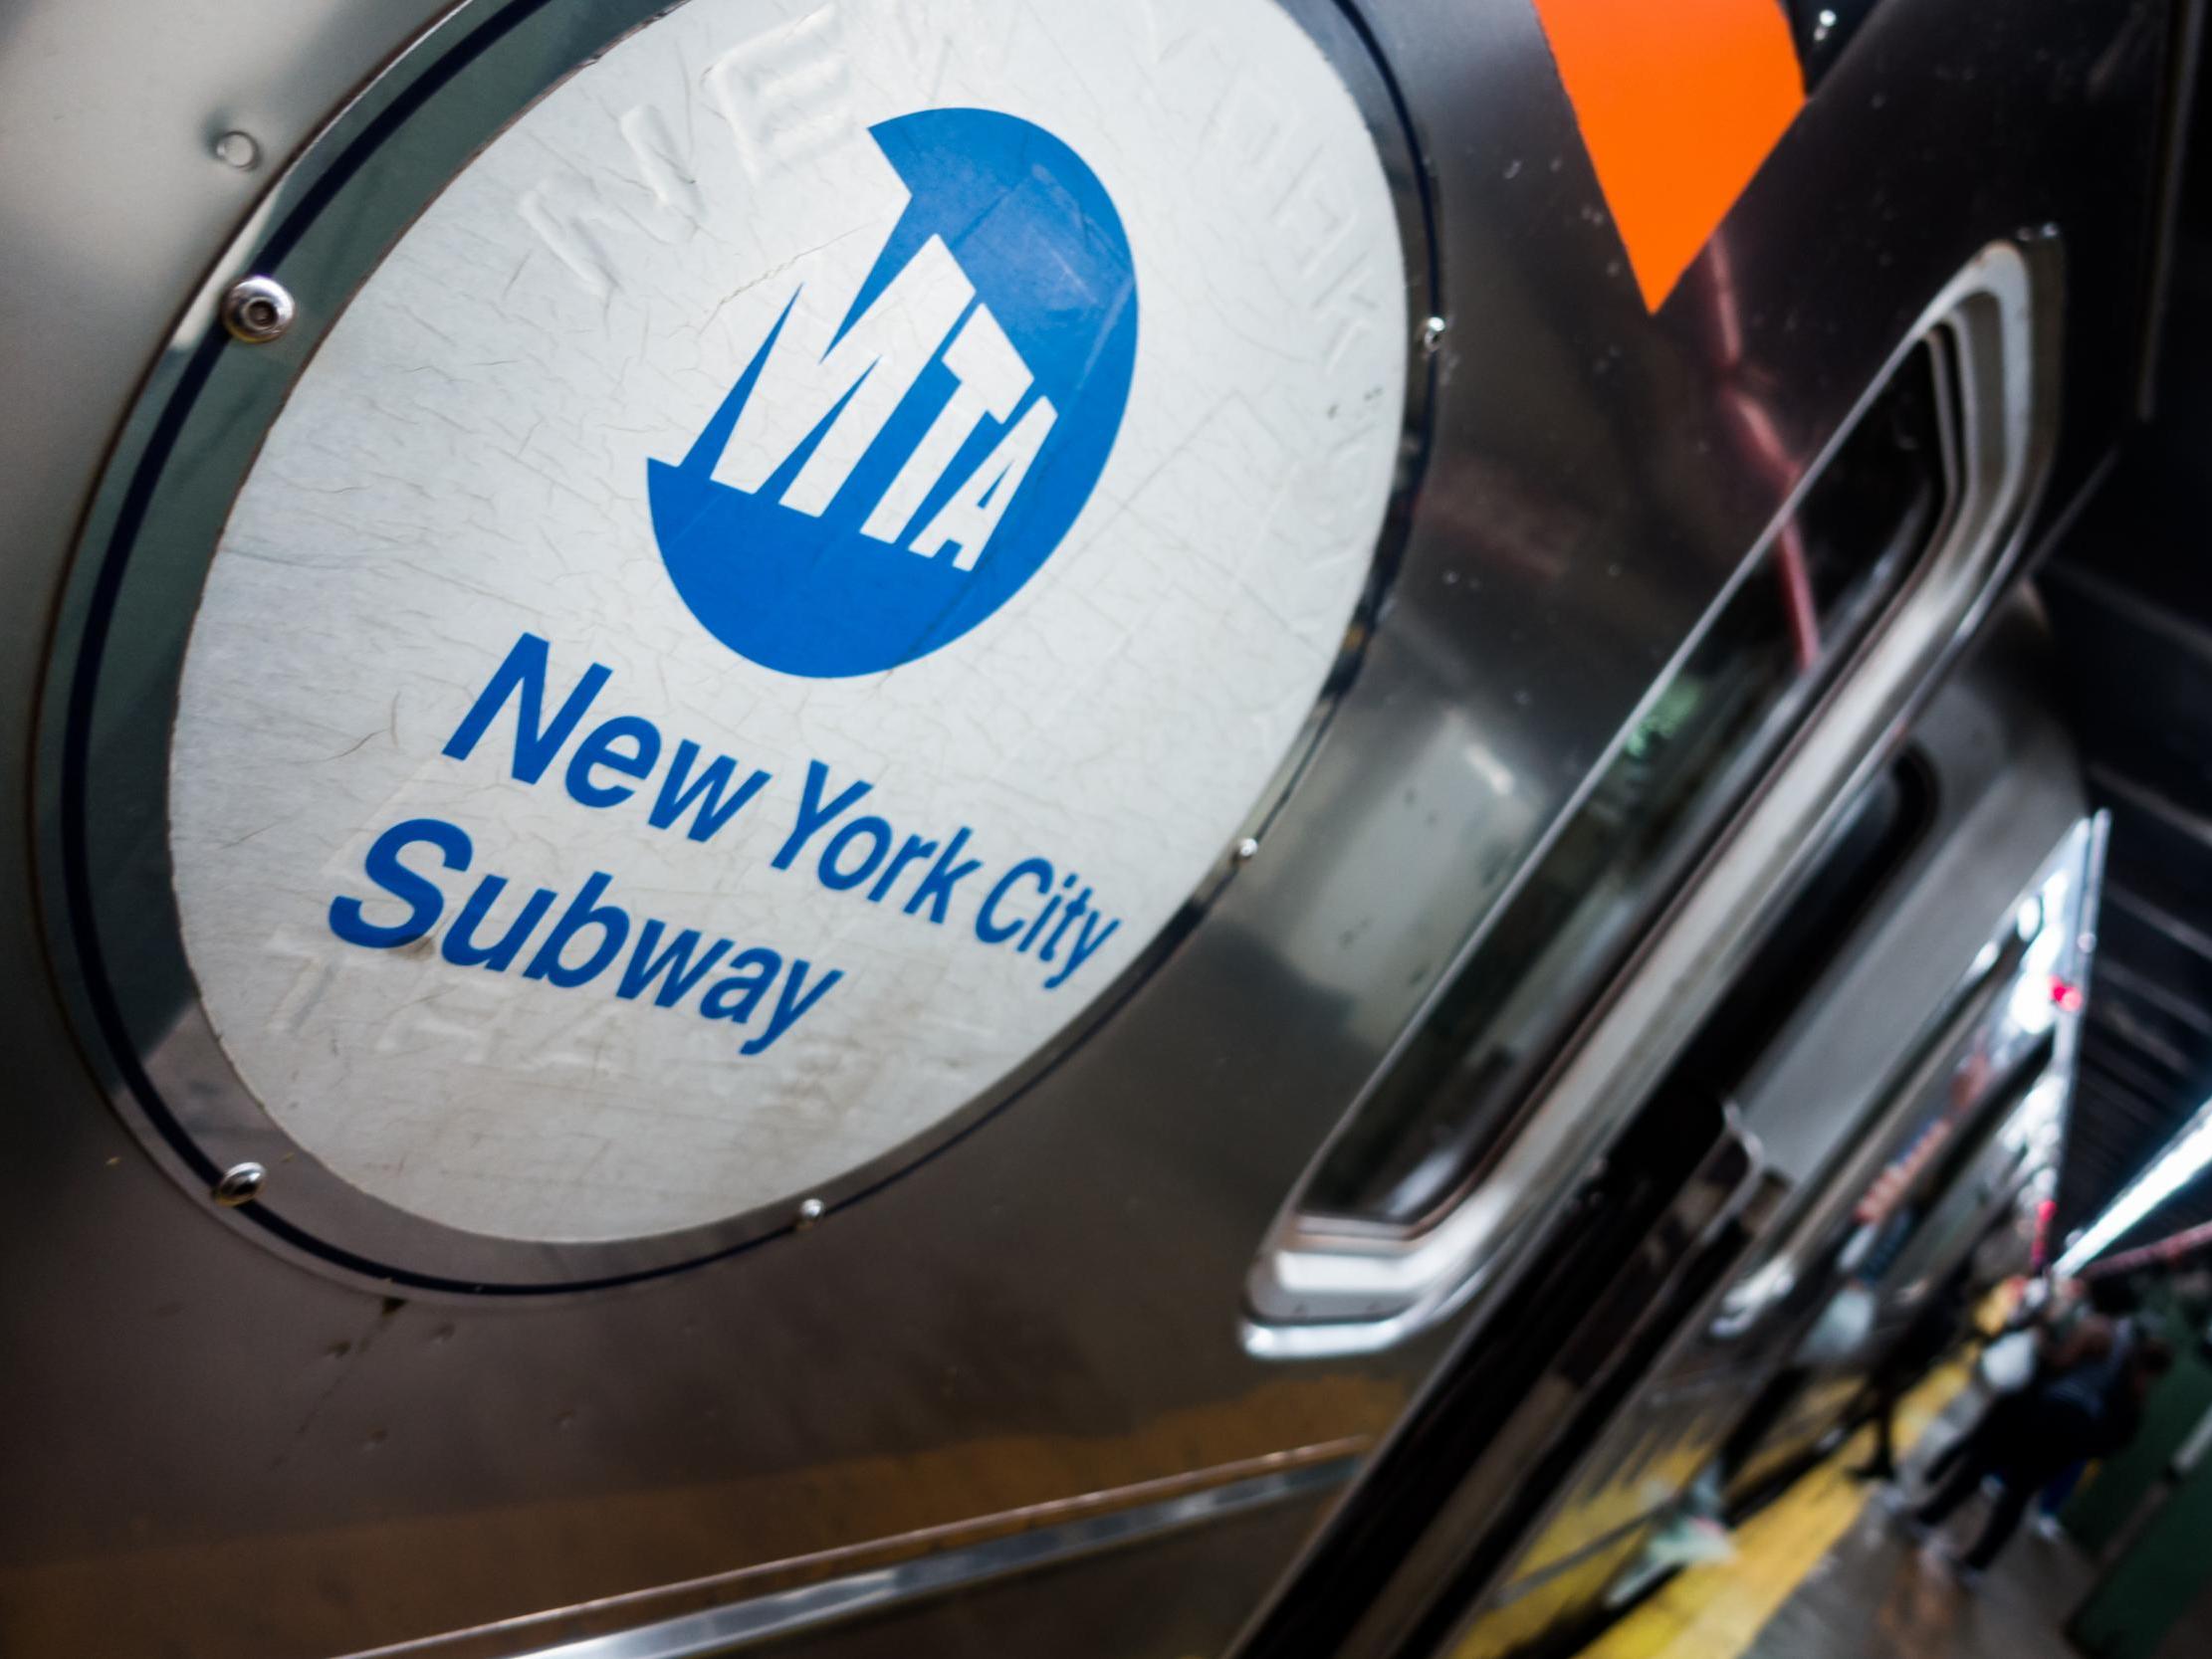 The bollard-like machines are a relatively new addition to the city’s subway system